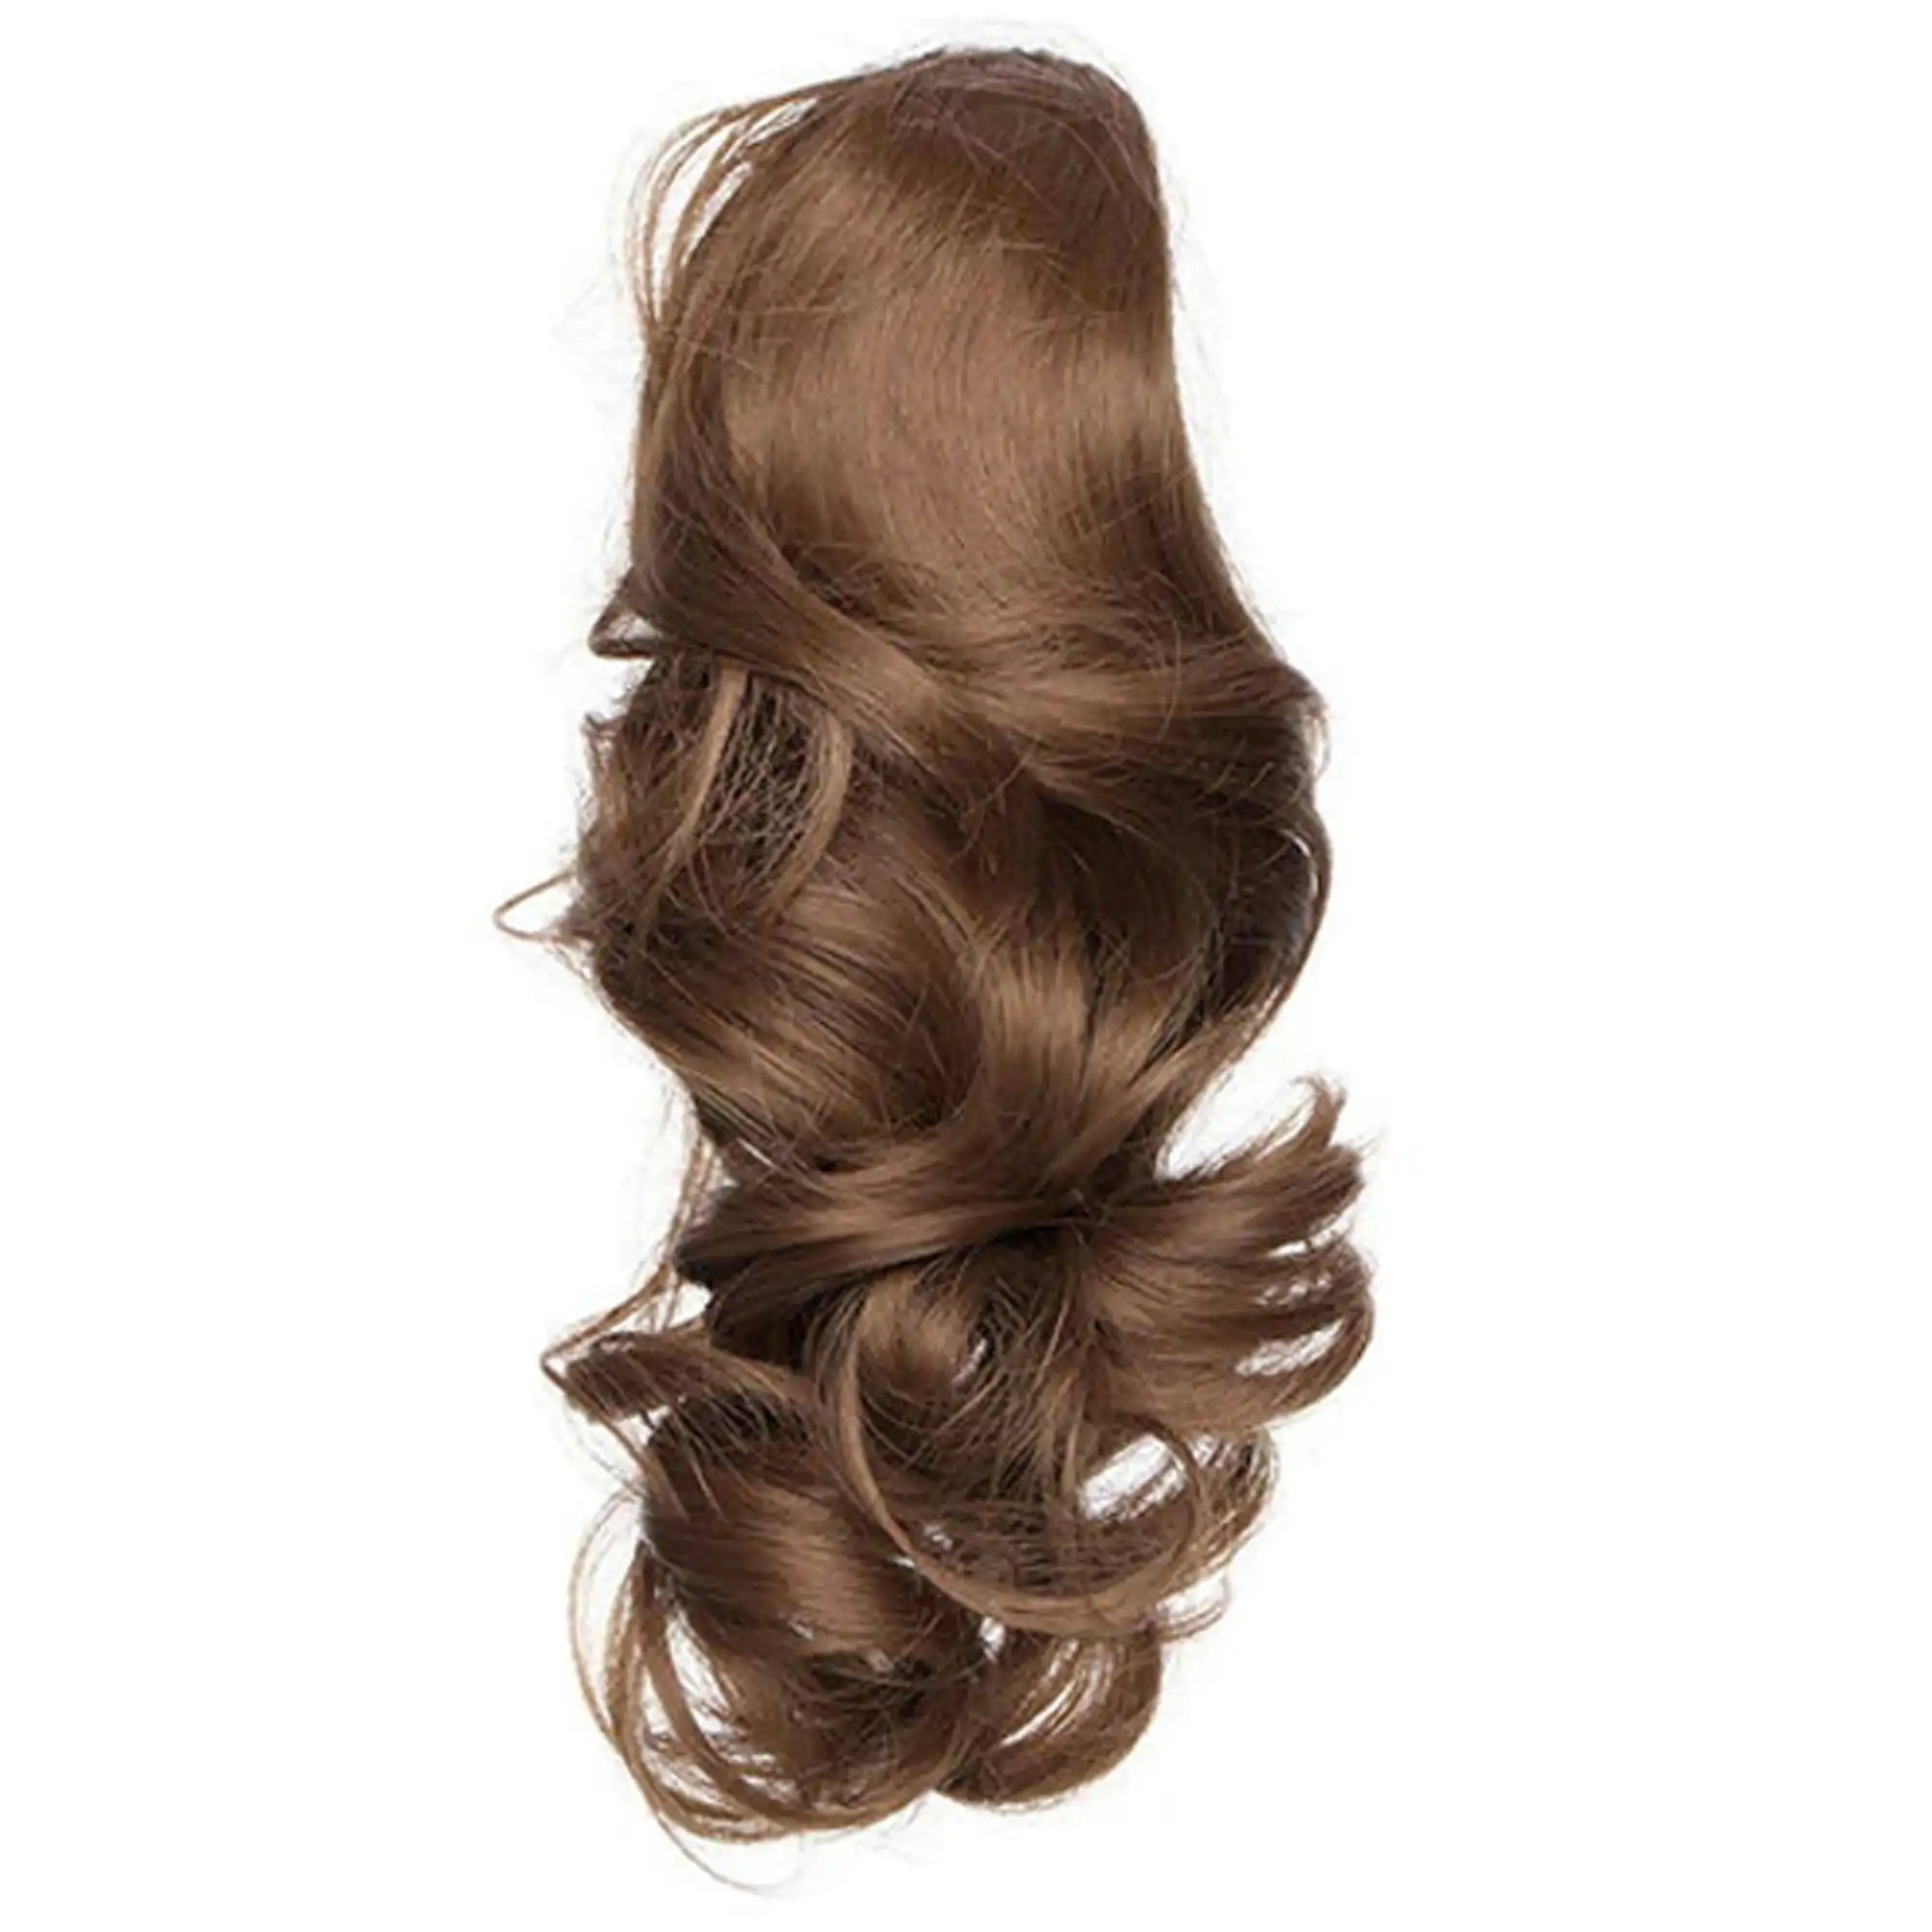 22" Hair Extension Brown High Grade Ponytail Ribbon Clamp Claw Wavy